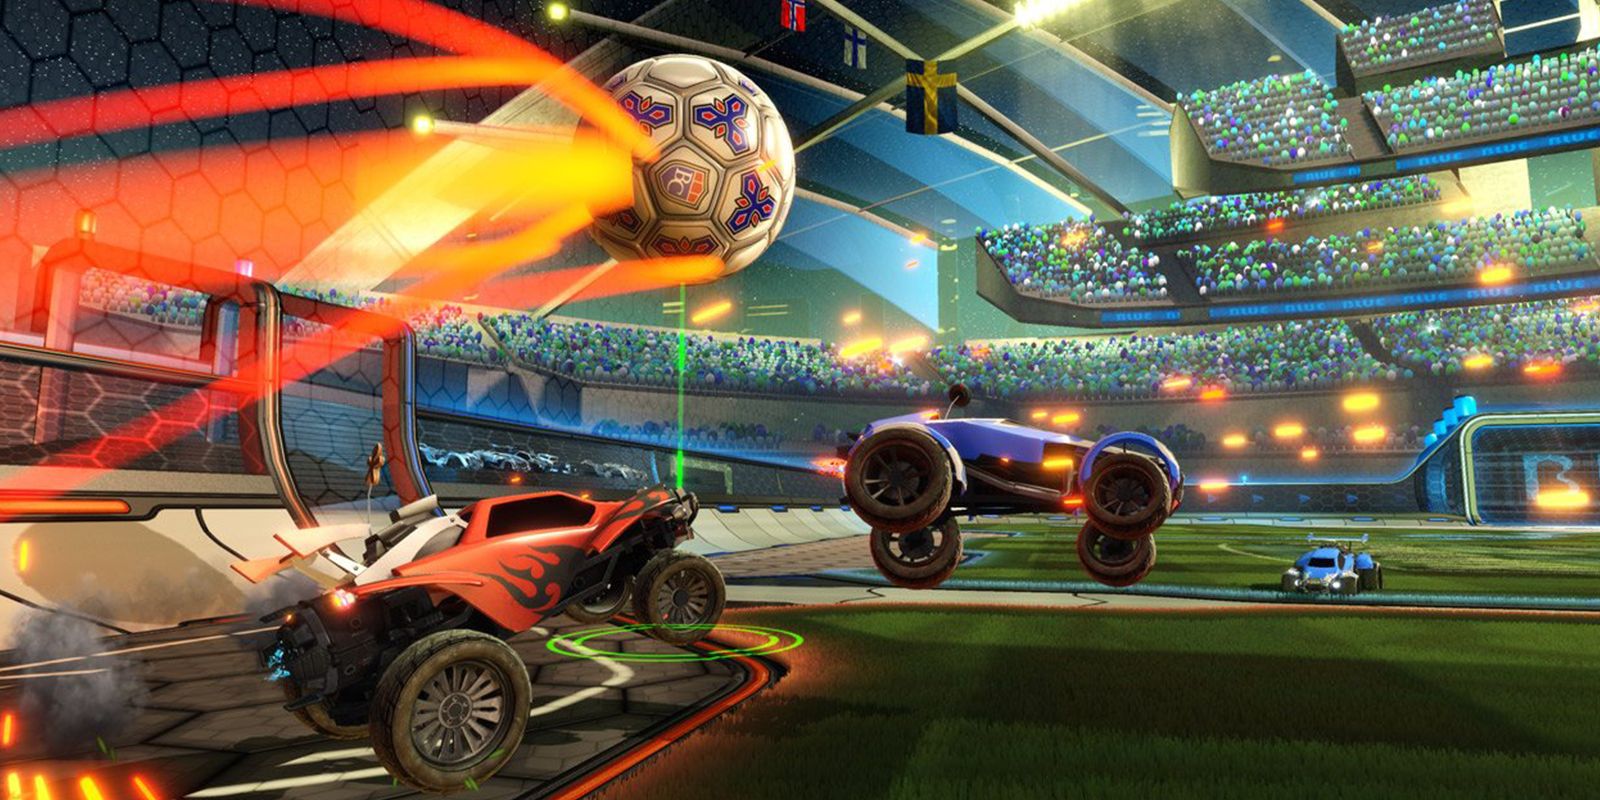 Rocket League’s Blueprint Update is Angering Fans With Its Outrageous Prices